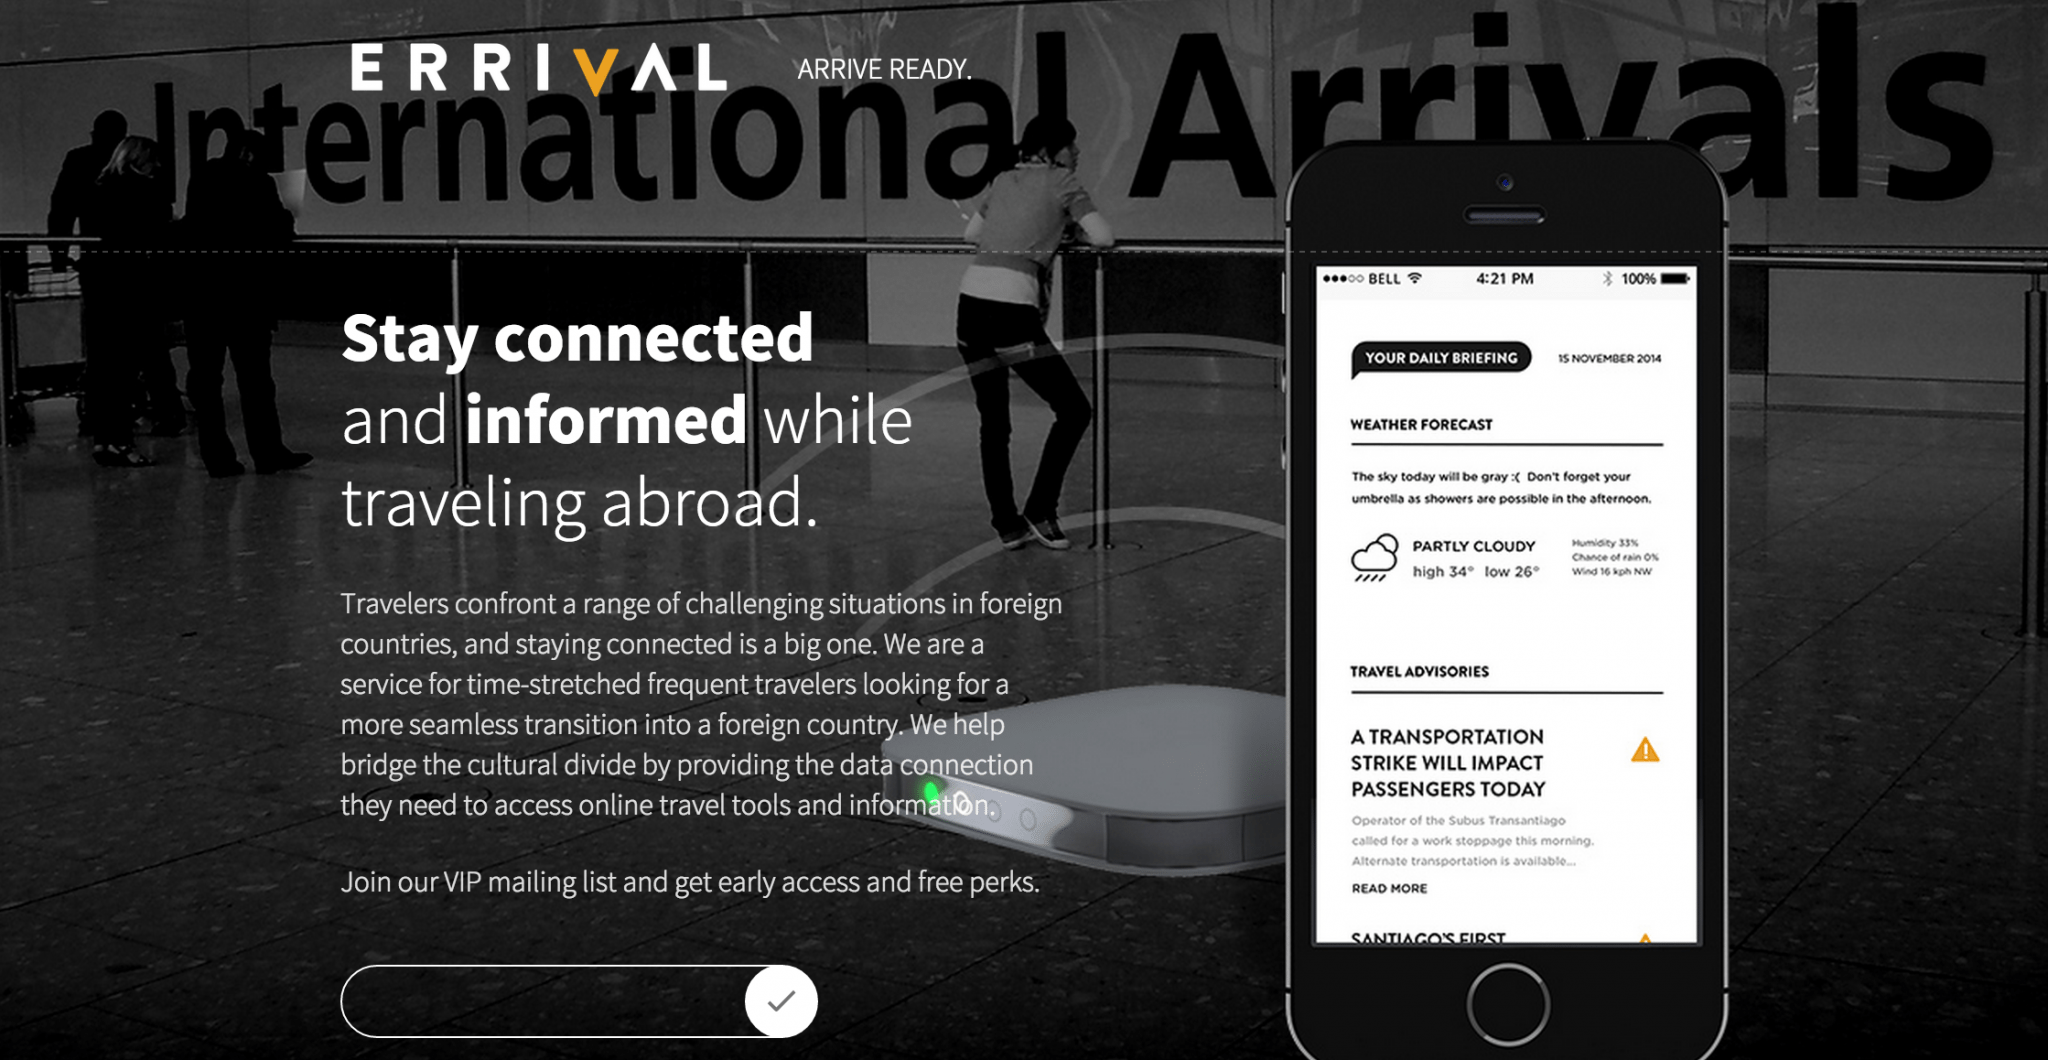 Errival provides travelers with data connections for smartphones to get Internet access and make calls abroad.